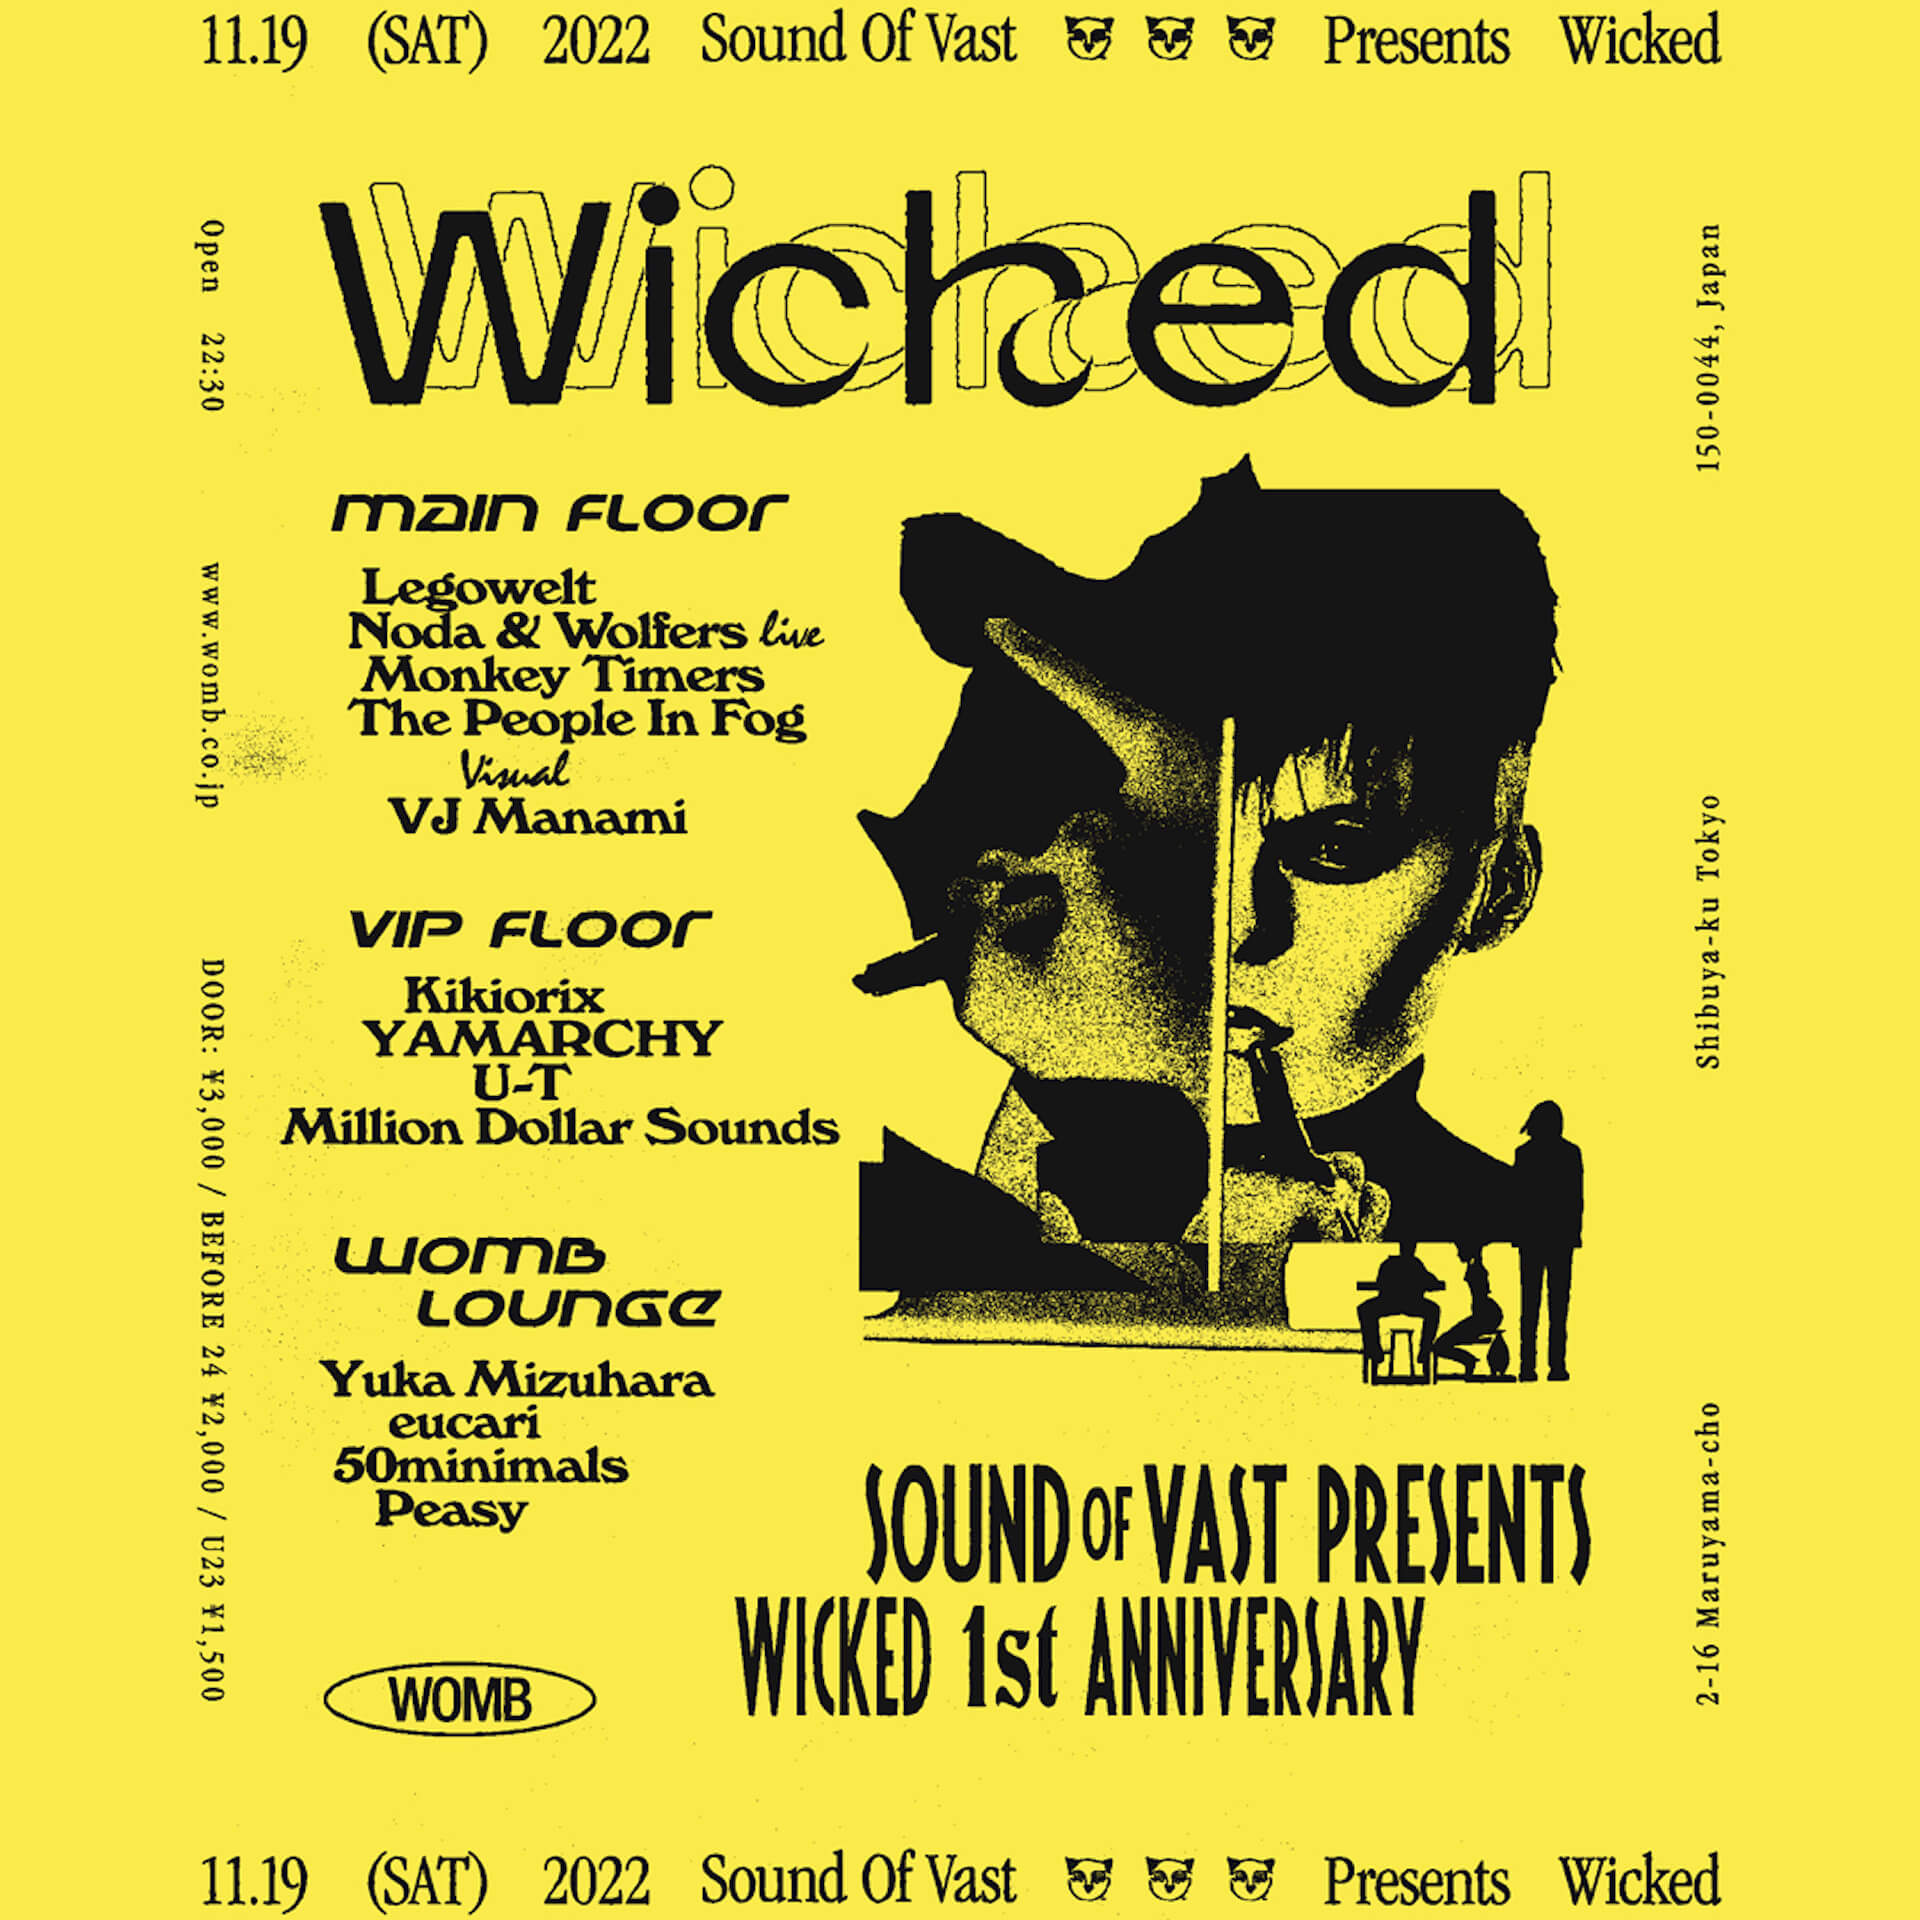 〈Sound Of Vast〉がホストするパーティー＜Wicked＞、オランダの鬼才・Legoweltを迎え1st Anniversary partyを開催 music221109-wicked-at-womb-04